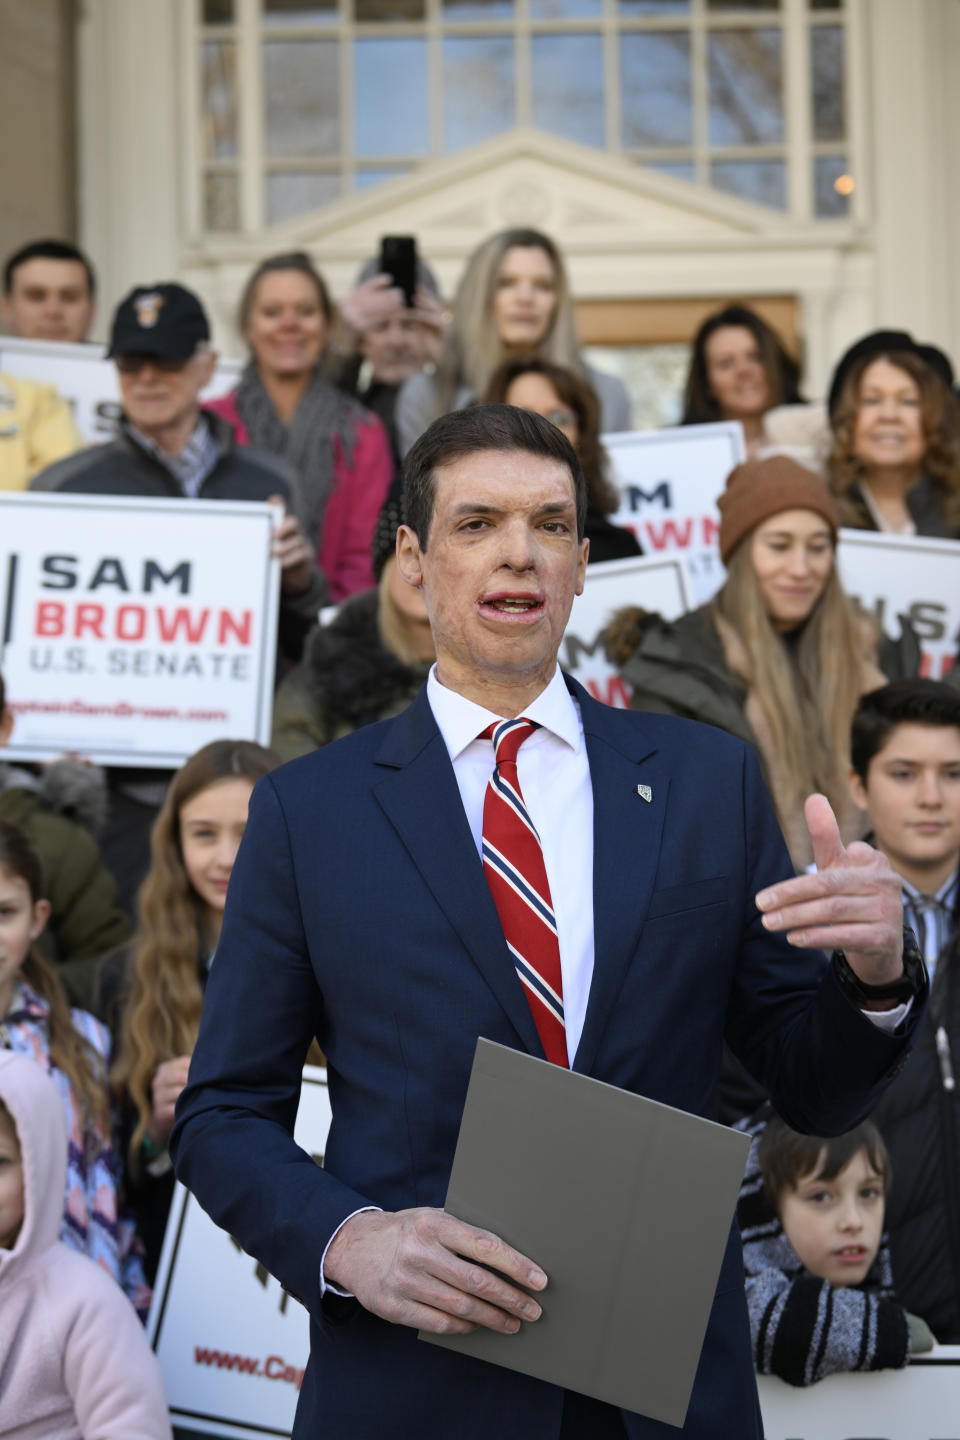 Republican U.S. Senatorial candidate Sam Brown speaks after filing his paperwork to run for the Senate, Thursday, March 14, 2024, at the State Capitol in Carson City, Nev. Brown is seeking to replace incumbent U.S. Sen. Jacky Rosen. (AP Photo/Andy Barron)